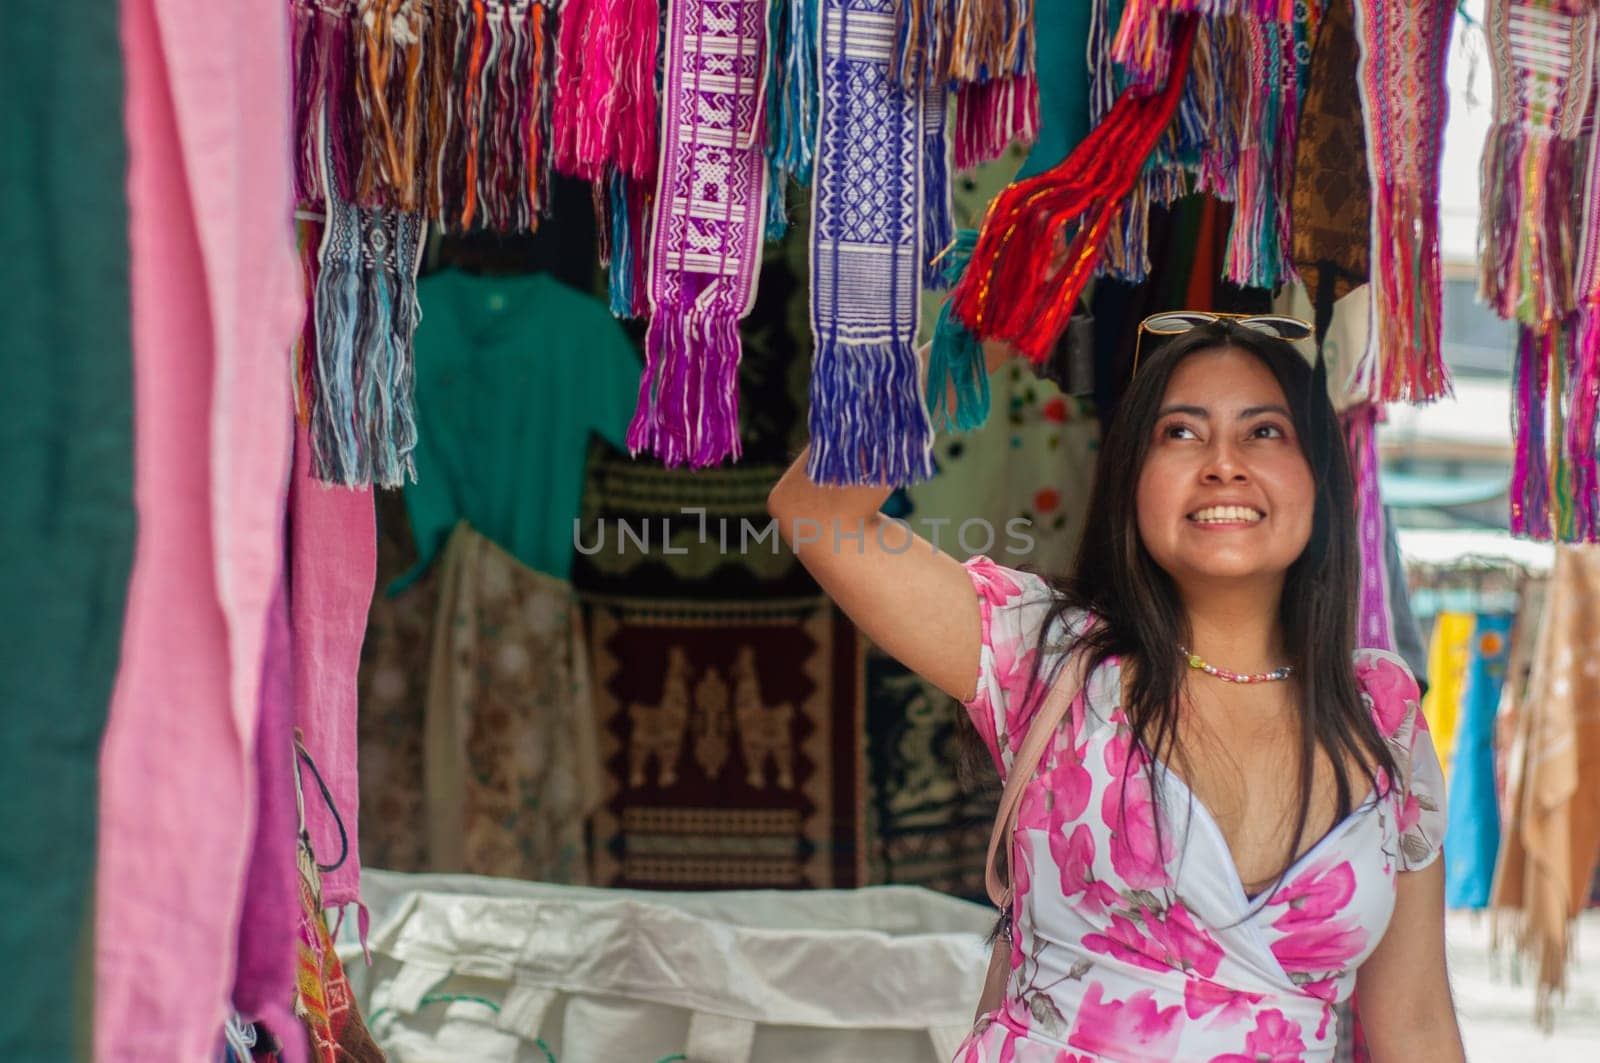 A cheerful woman goes sightseeing and chooses a brightly colored scarf from an assortment of handcrafted fabrics displayed at an open-air market stall. by Raulmartin